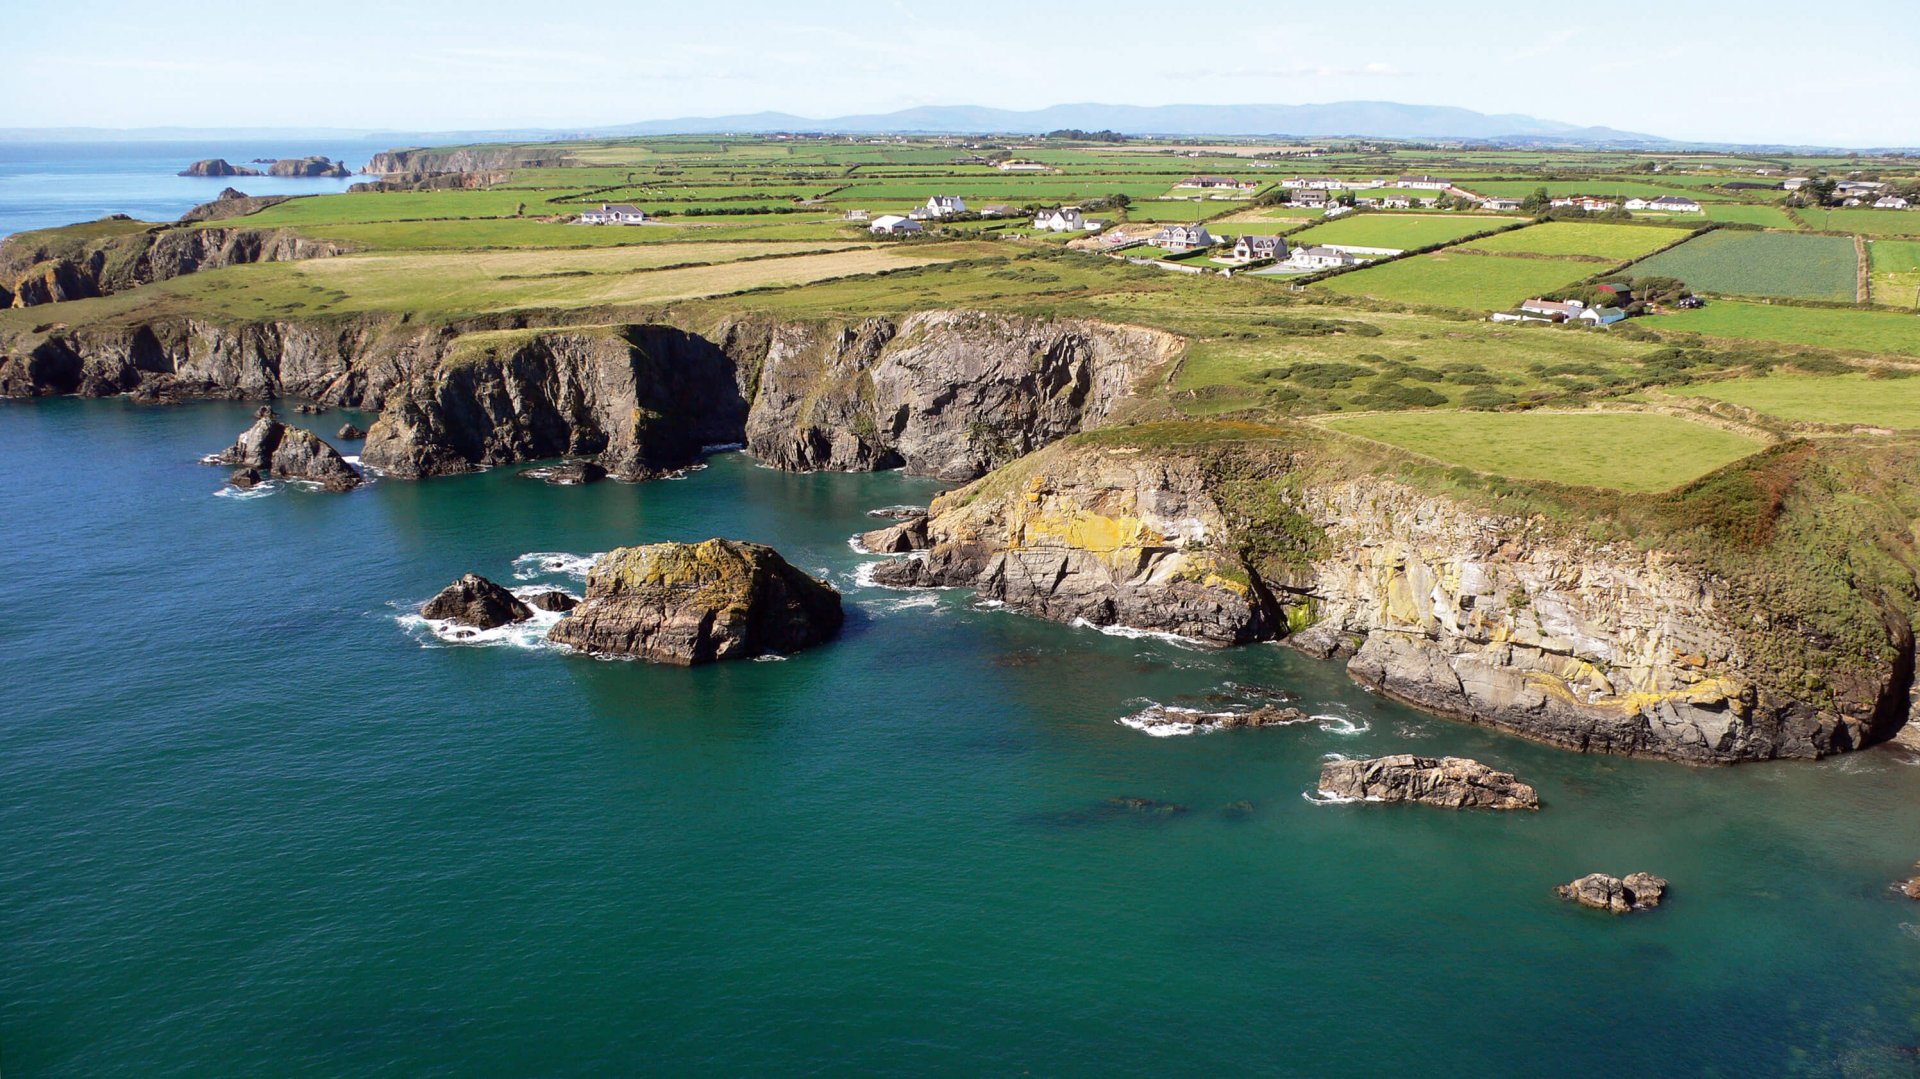 Sea, cliffs and patchwork green fields along the Copper Coast in Waterford